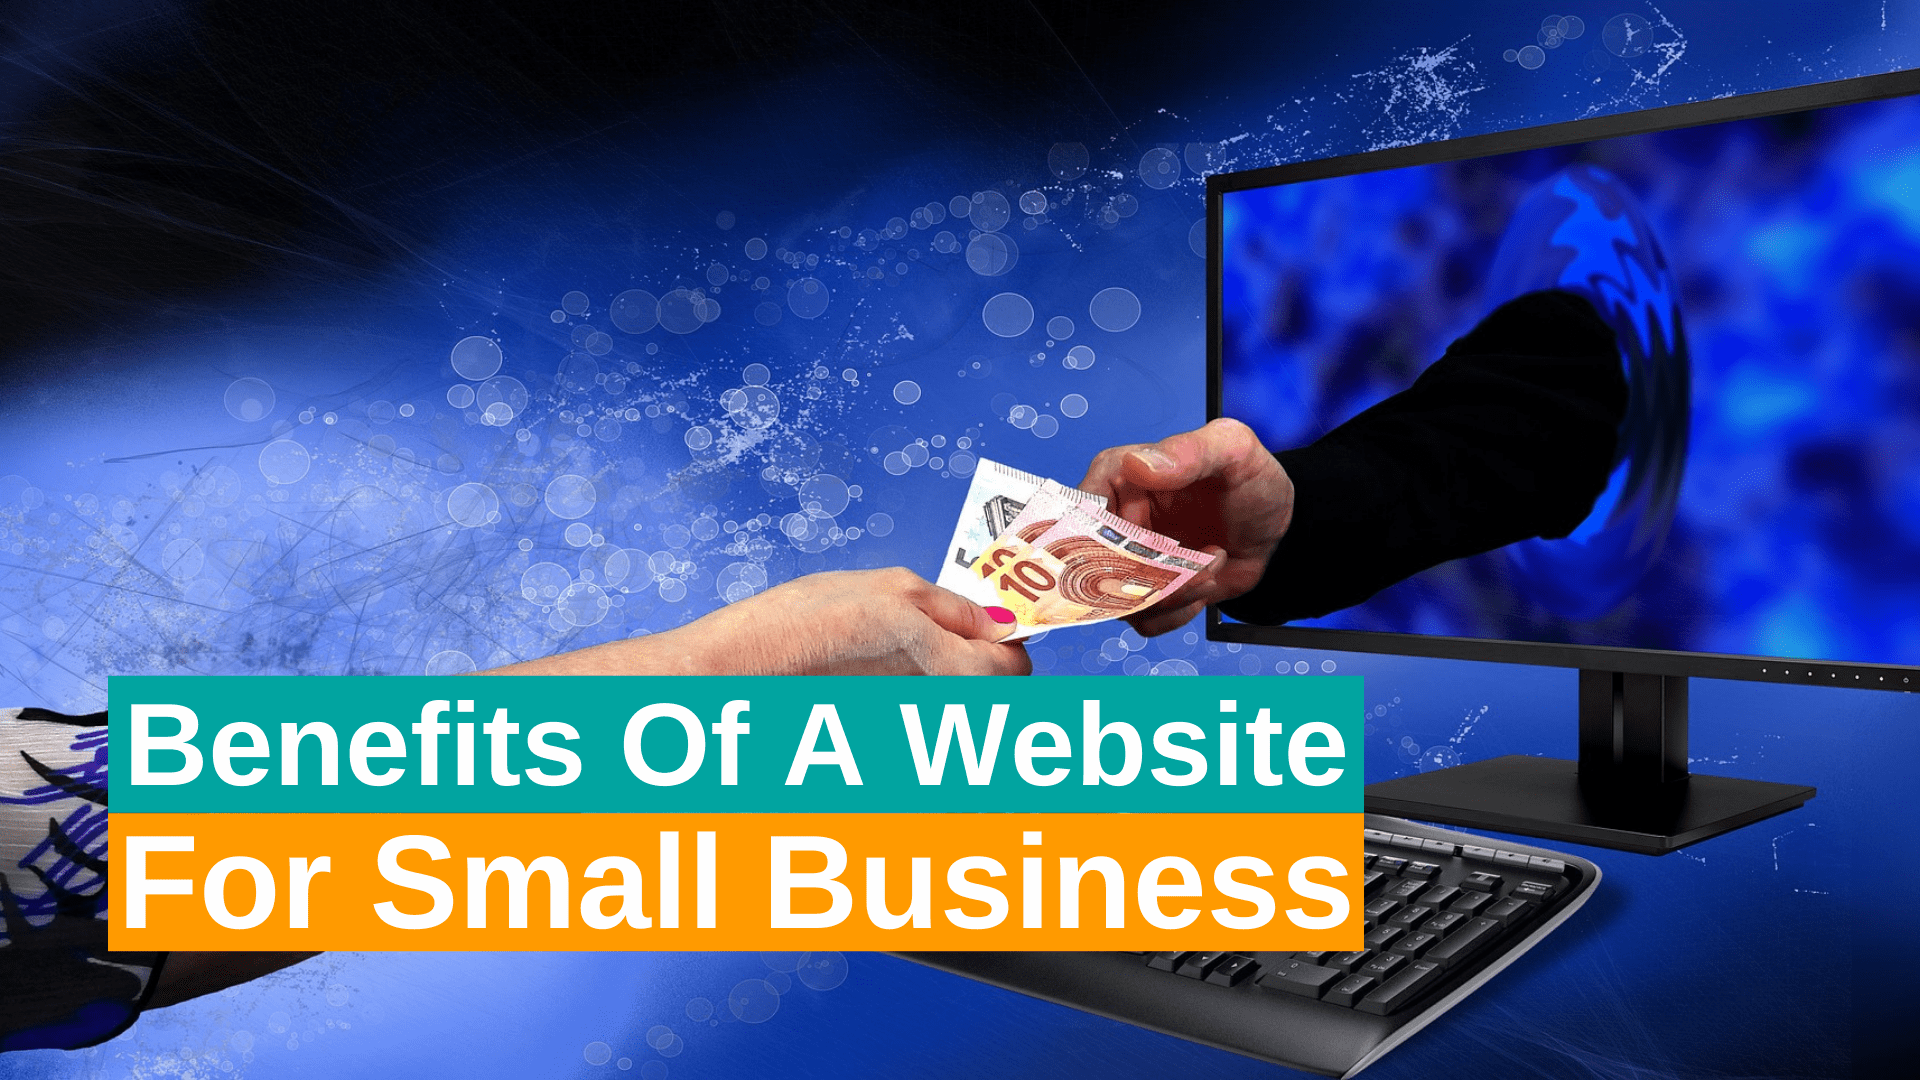 22 benefits of a website for small businesses